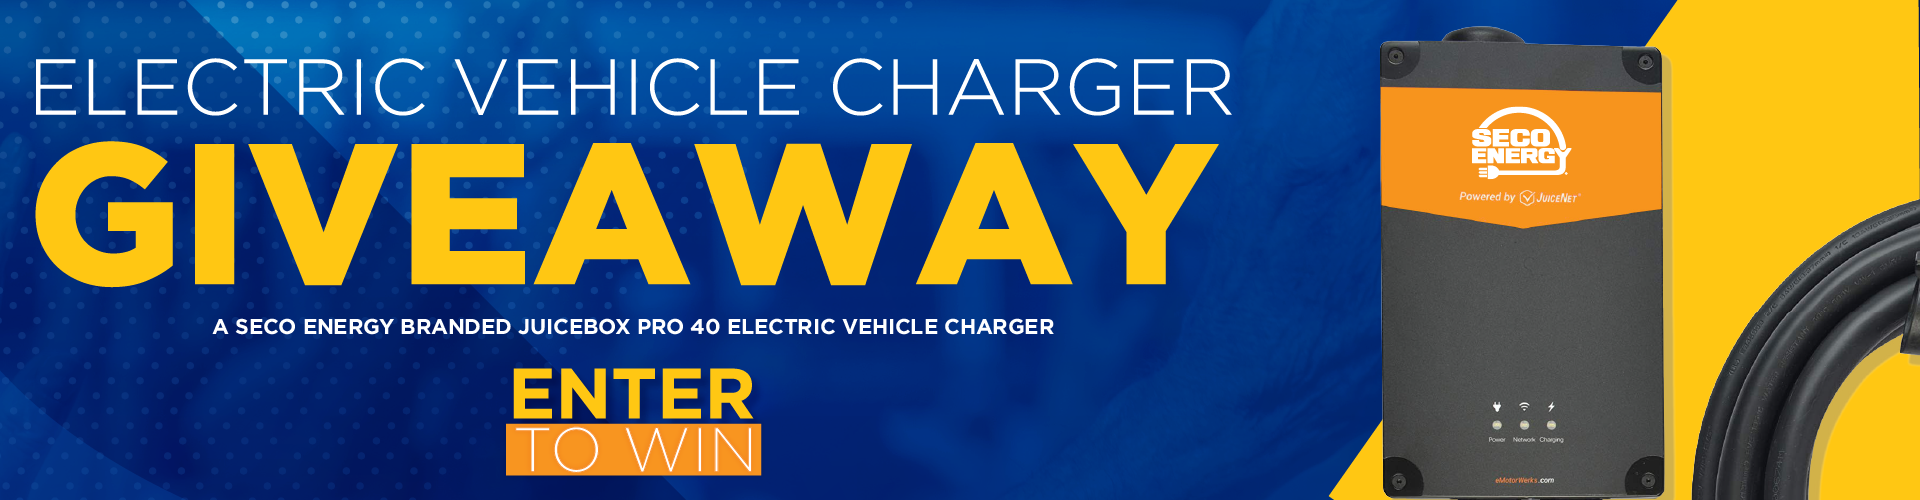 Electric Vehicle Charger Giveaway Hero Banner